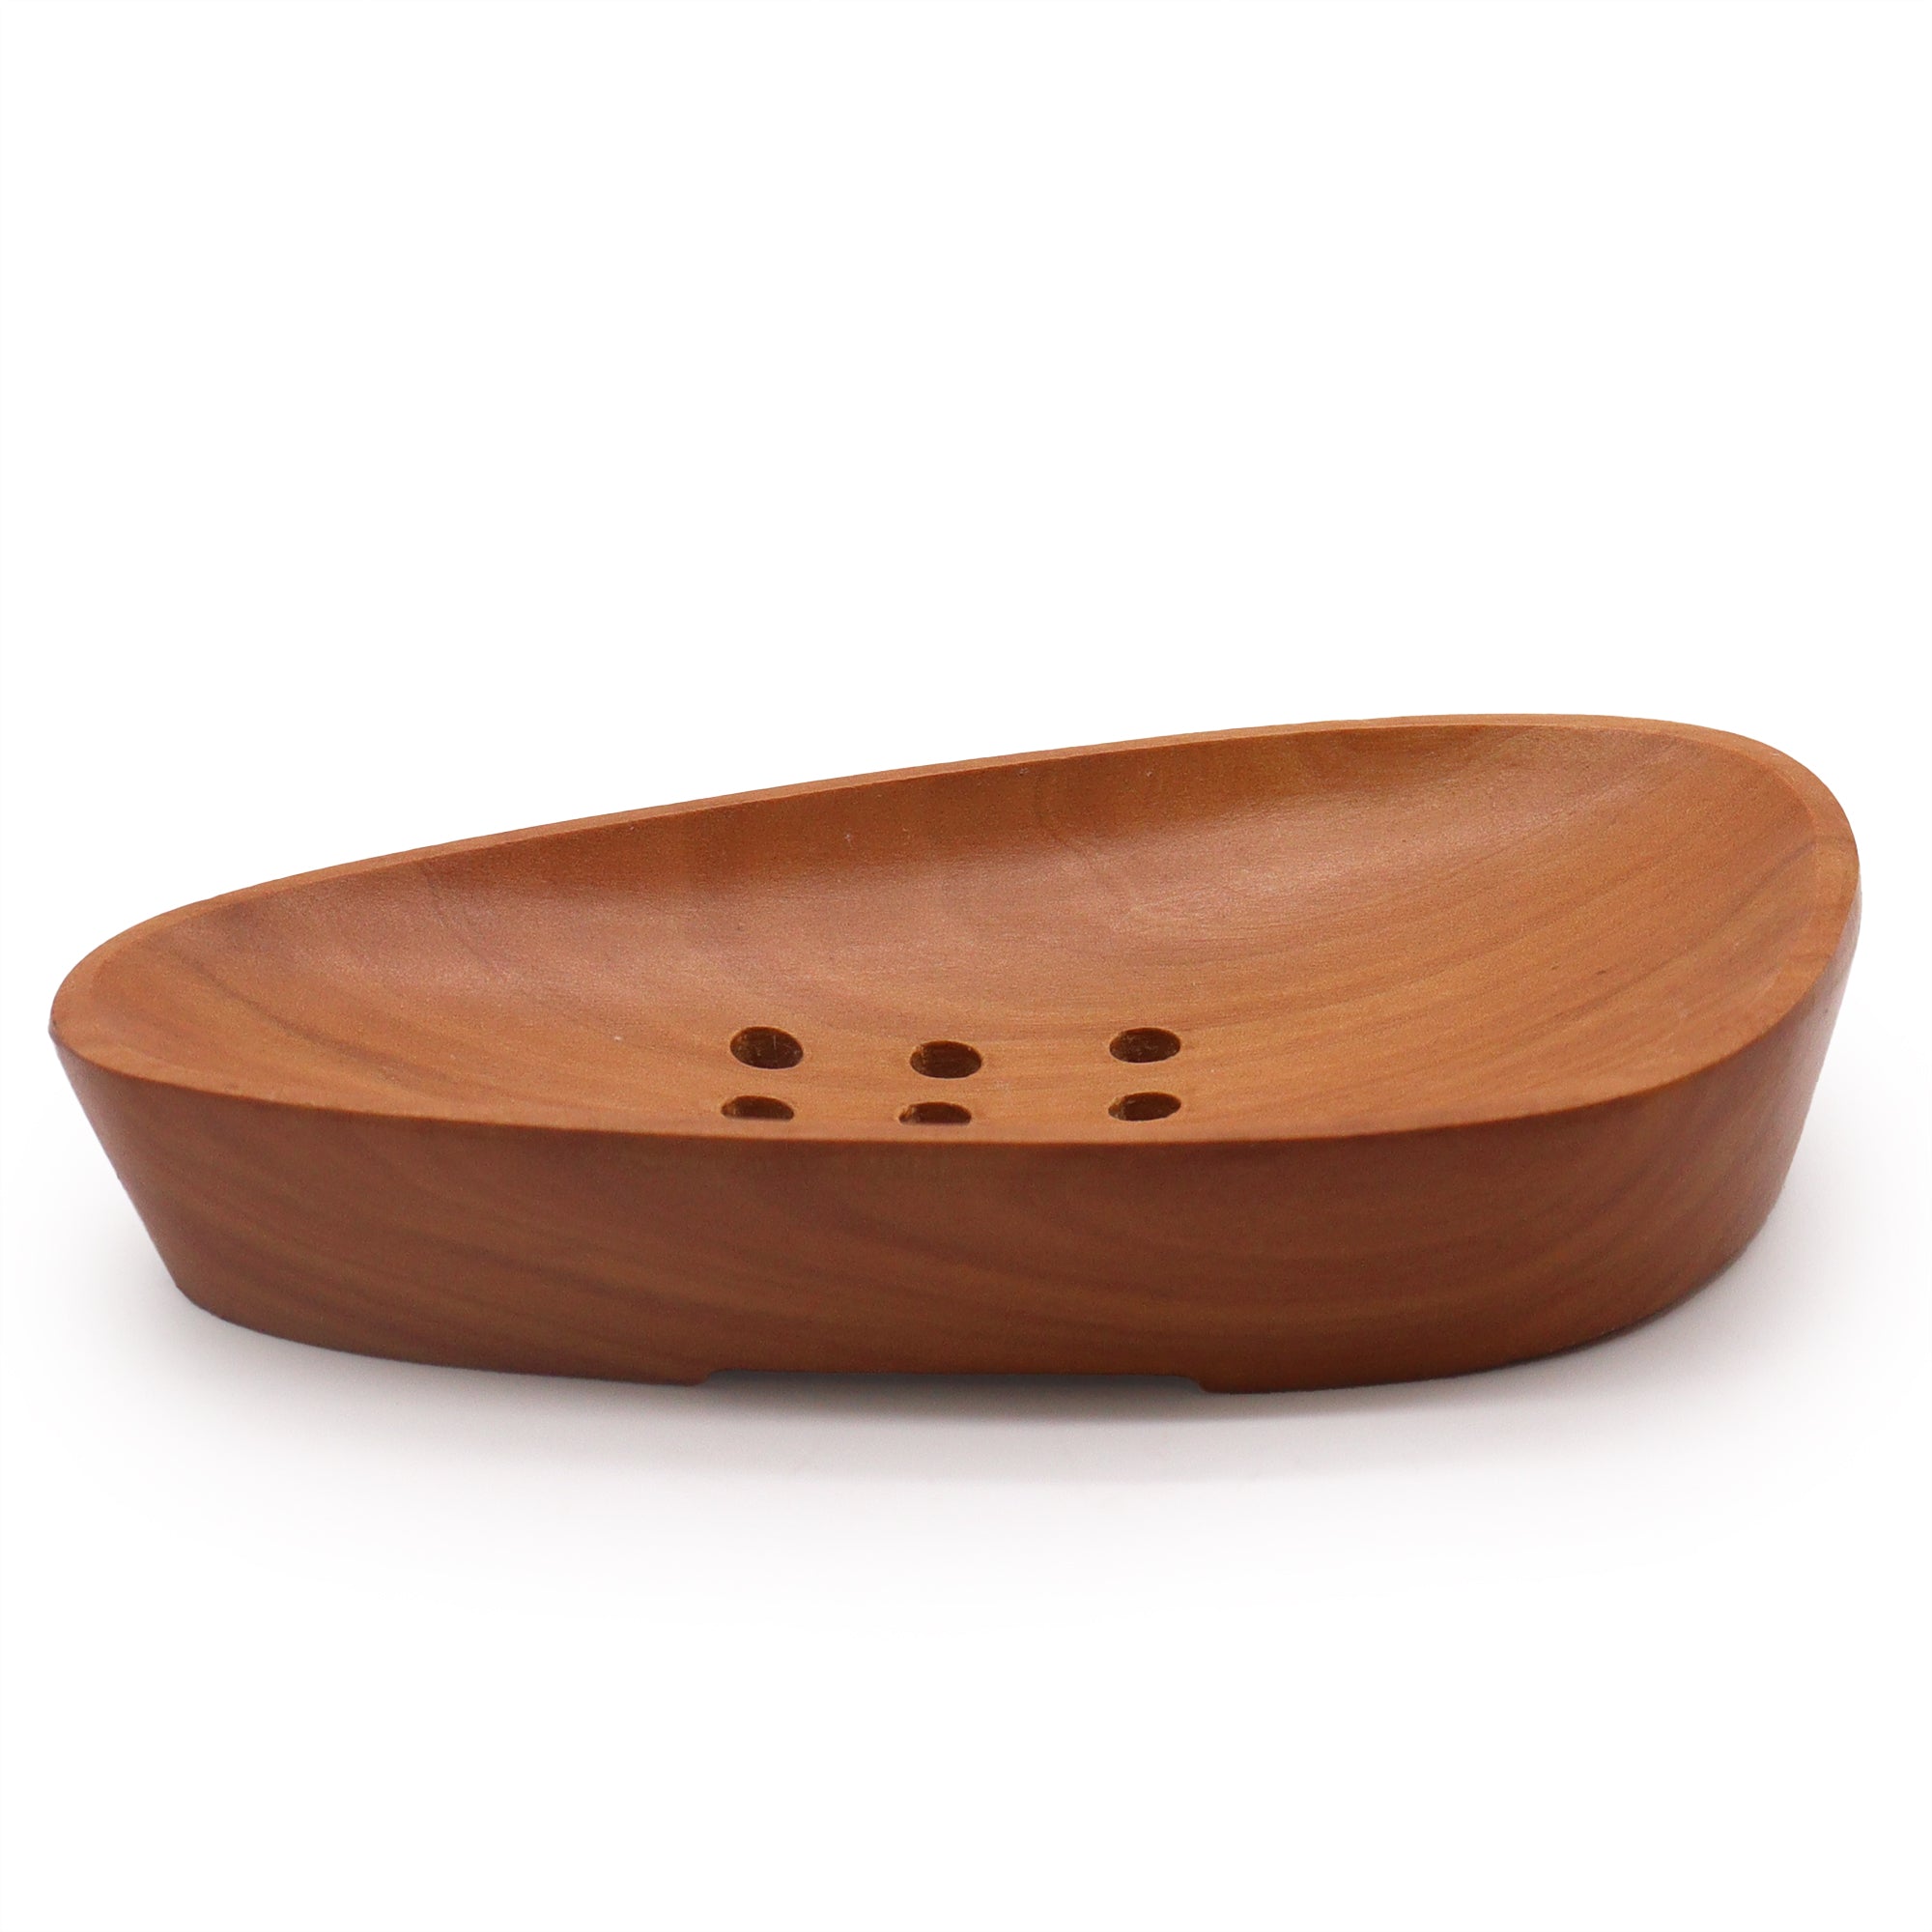 View Classic Mahogany Soap Dishes information